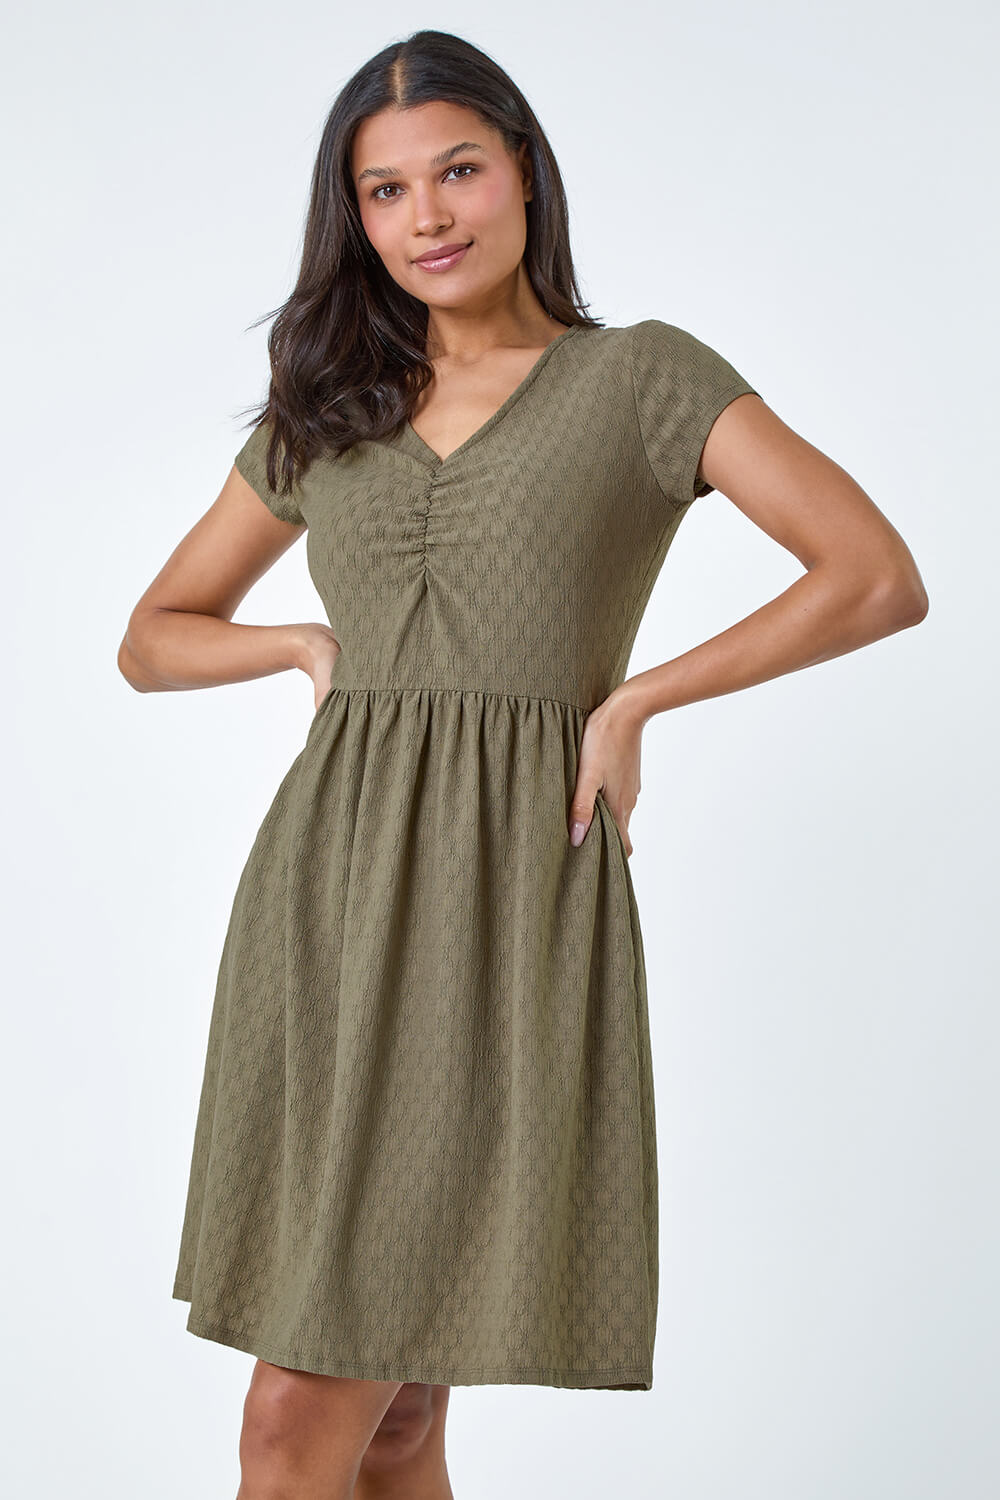 KHAKI Textured Ruched Stretch Jersey Dress, Image 4 of 5